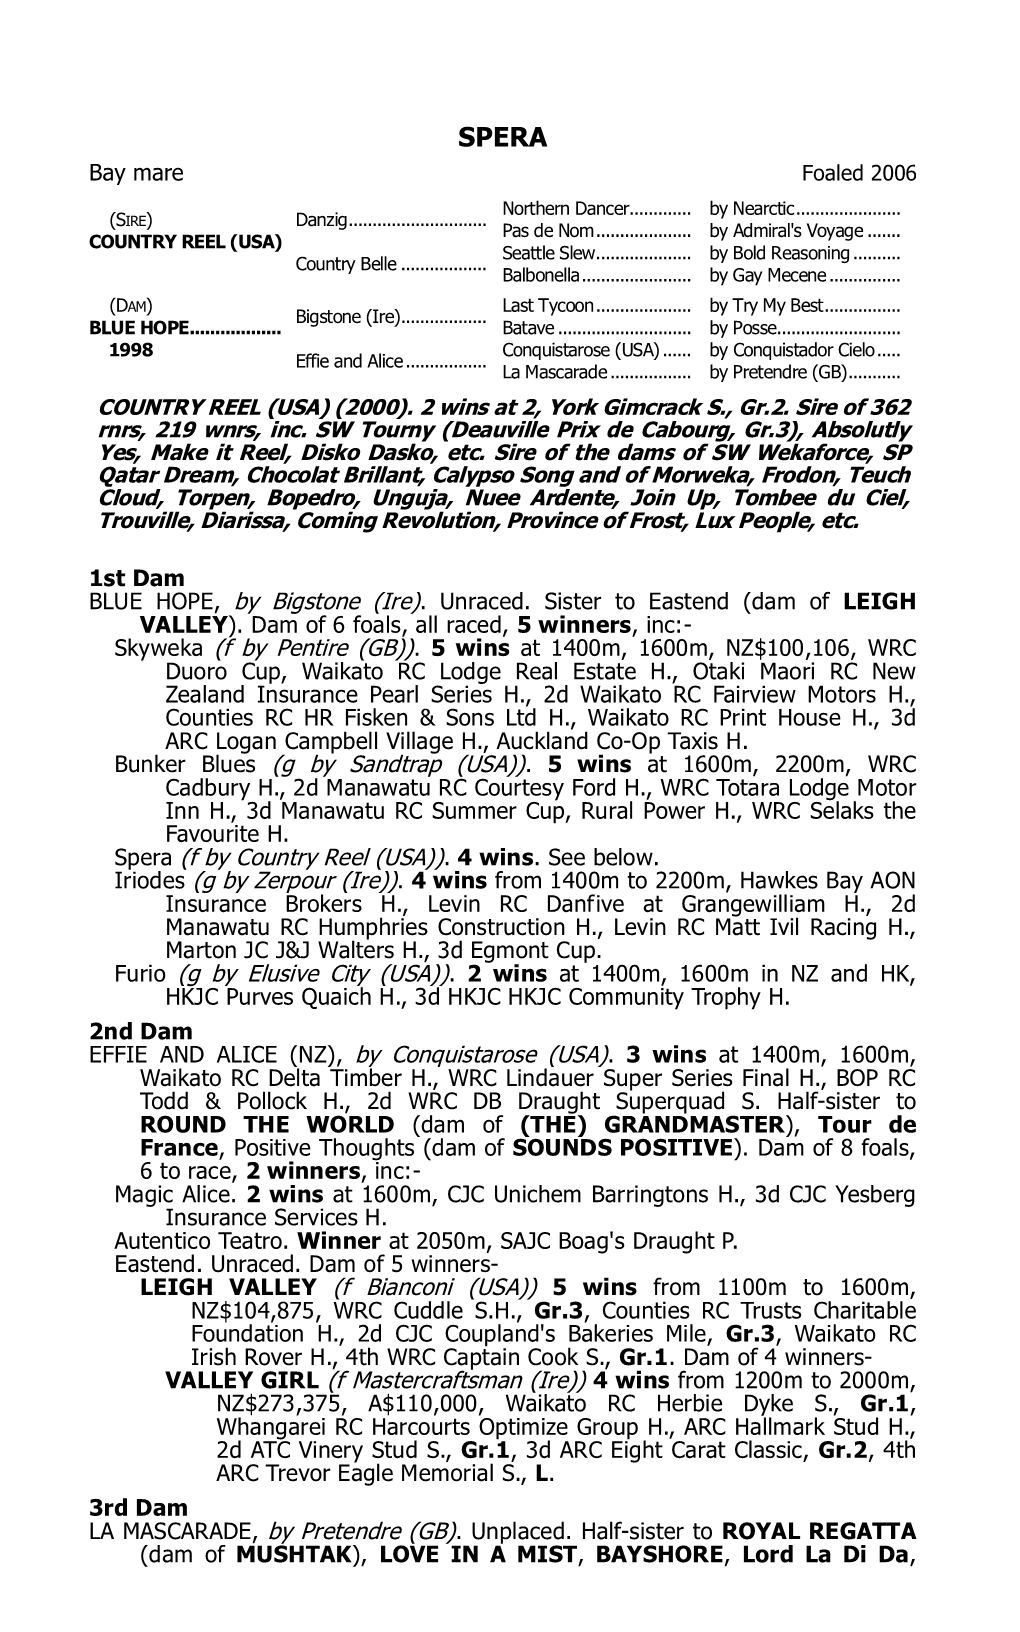 Dam of LEIGH VALLEY). Dam of 6 Foals, All Raced, 5 Winners, Inc:- Skyweka (F by Pentire (GB